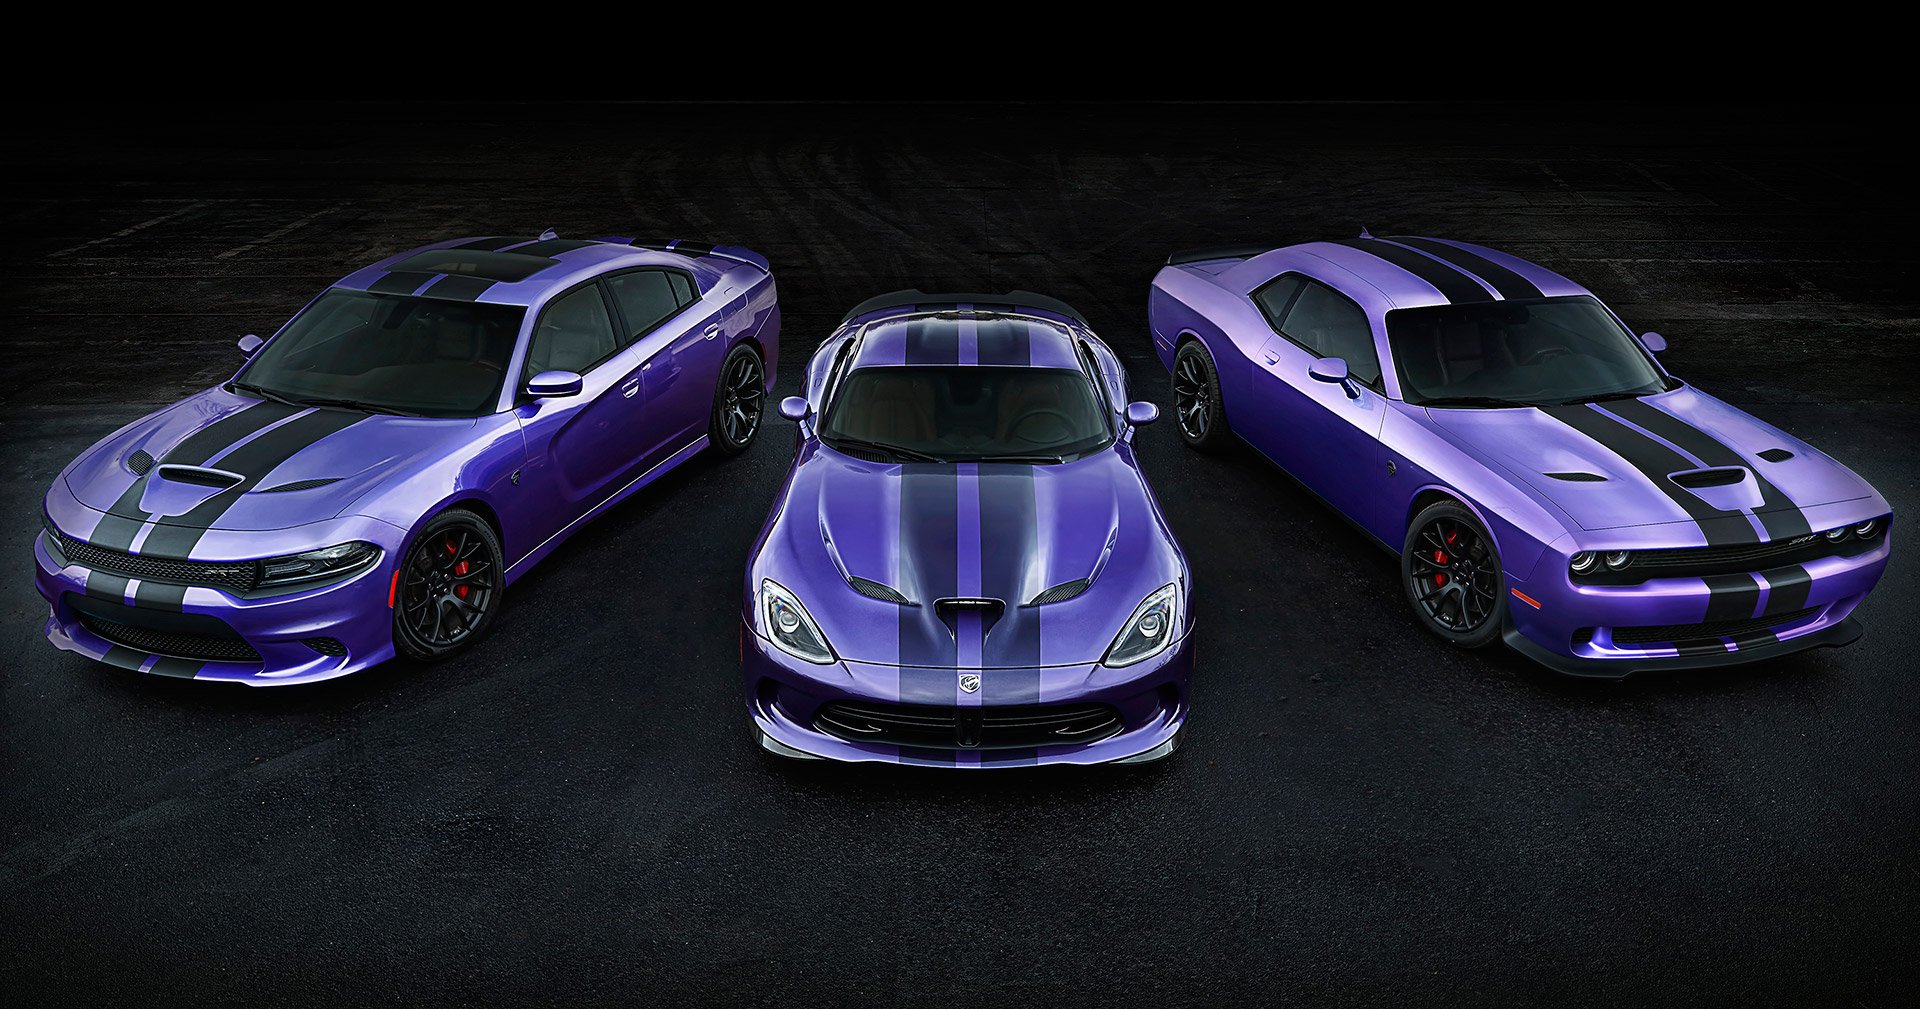 Dodge to Extend Availability of Plum Crazy Paint